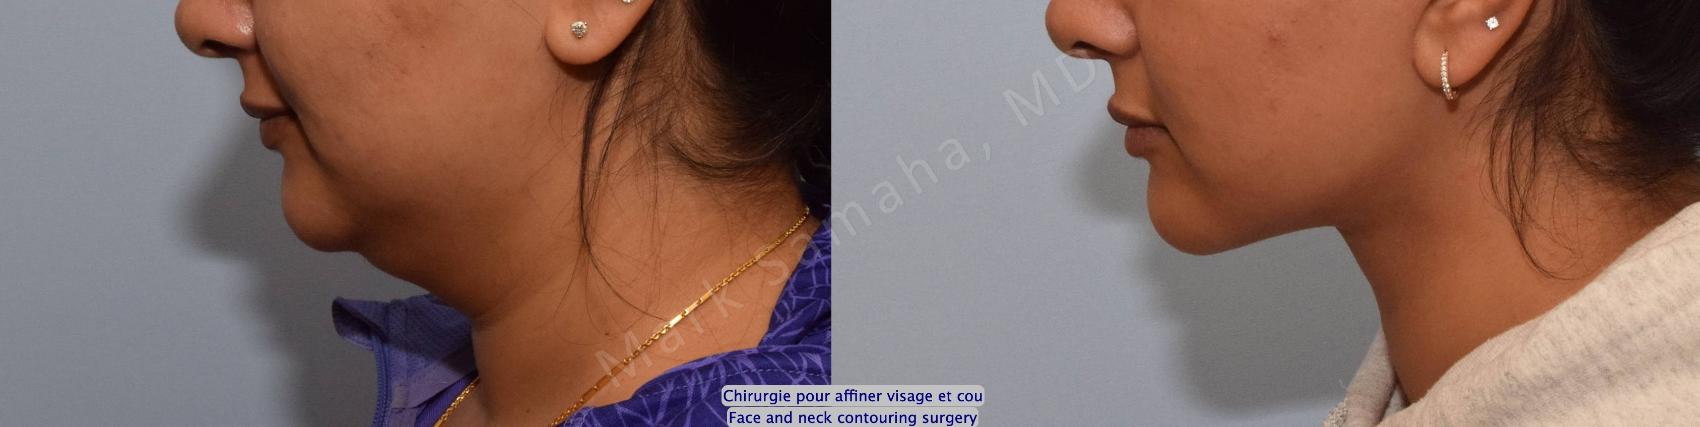 Before & After Chirurgie d’affinement du visage / Face Slimming Surgery Case 204 Left Side View in Montreal, QC